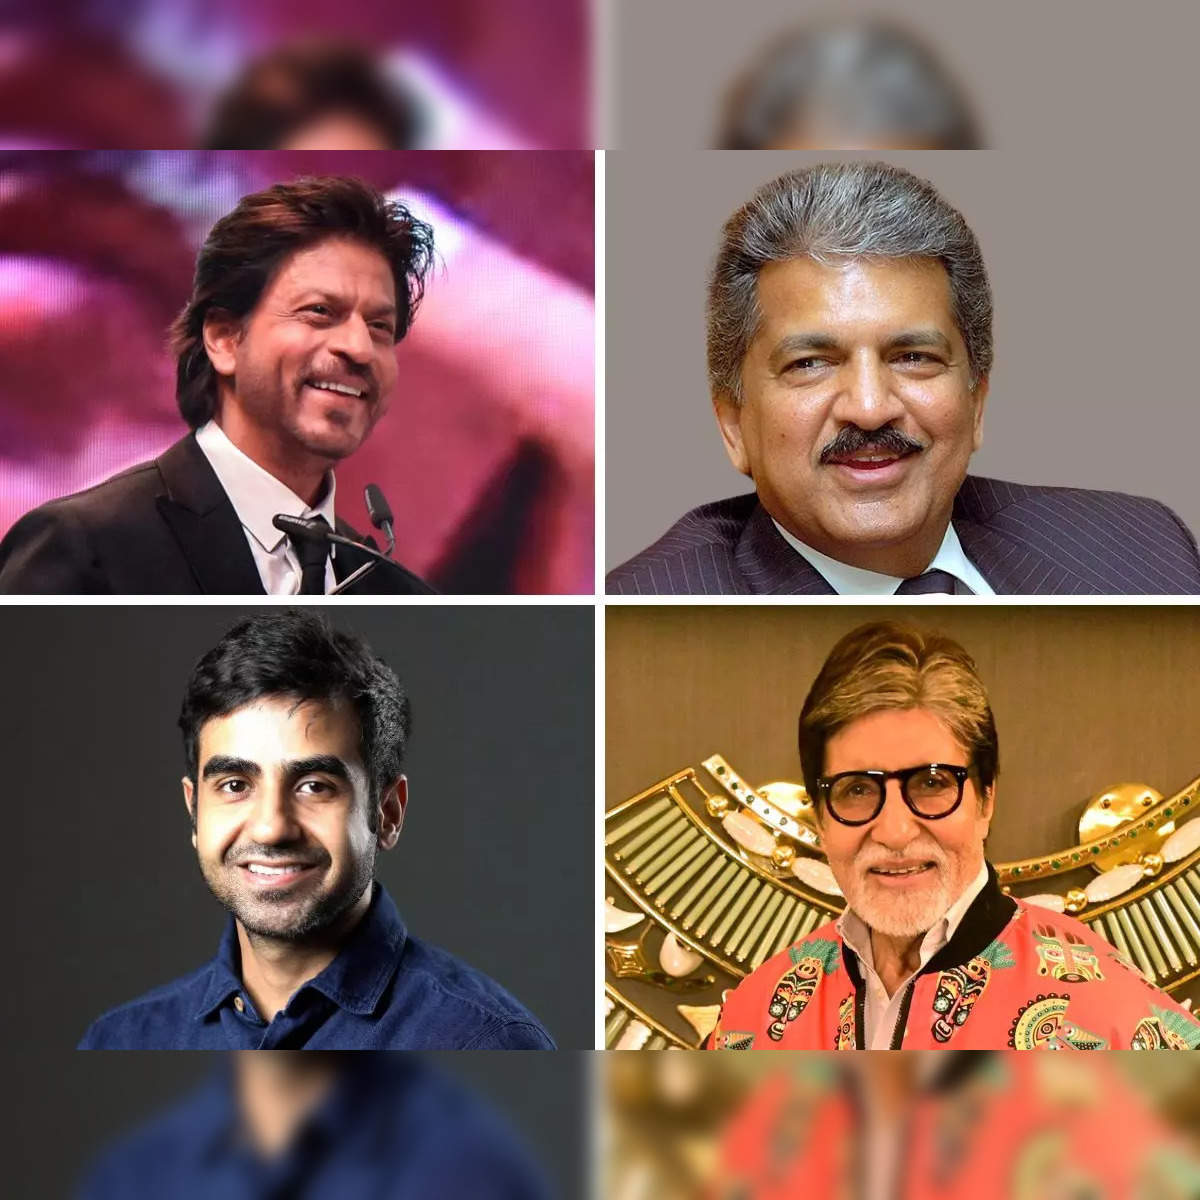 The new wave of Bollywood actors has more to offer than just good looks